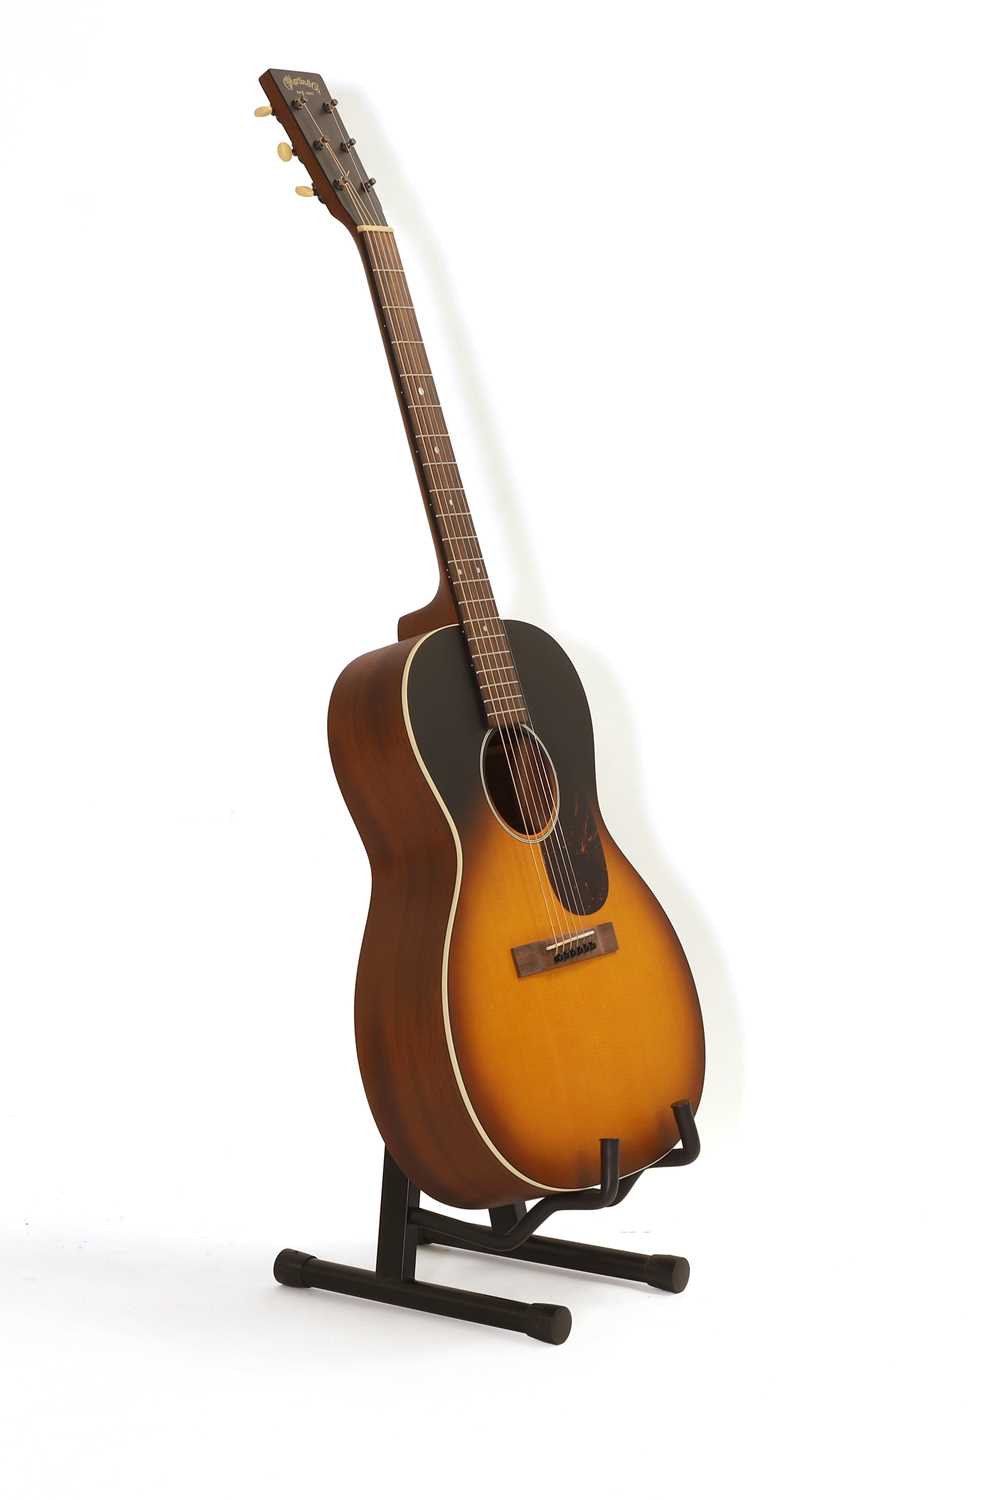 A 2009 Martin 00L-17 acoustic guitar, - Image 5 of 13